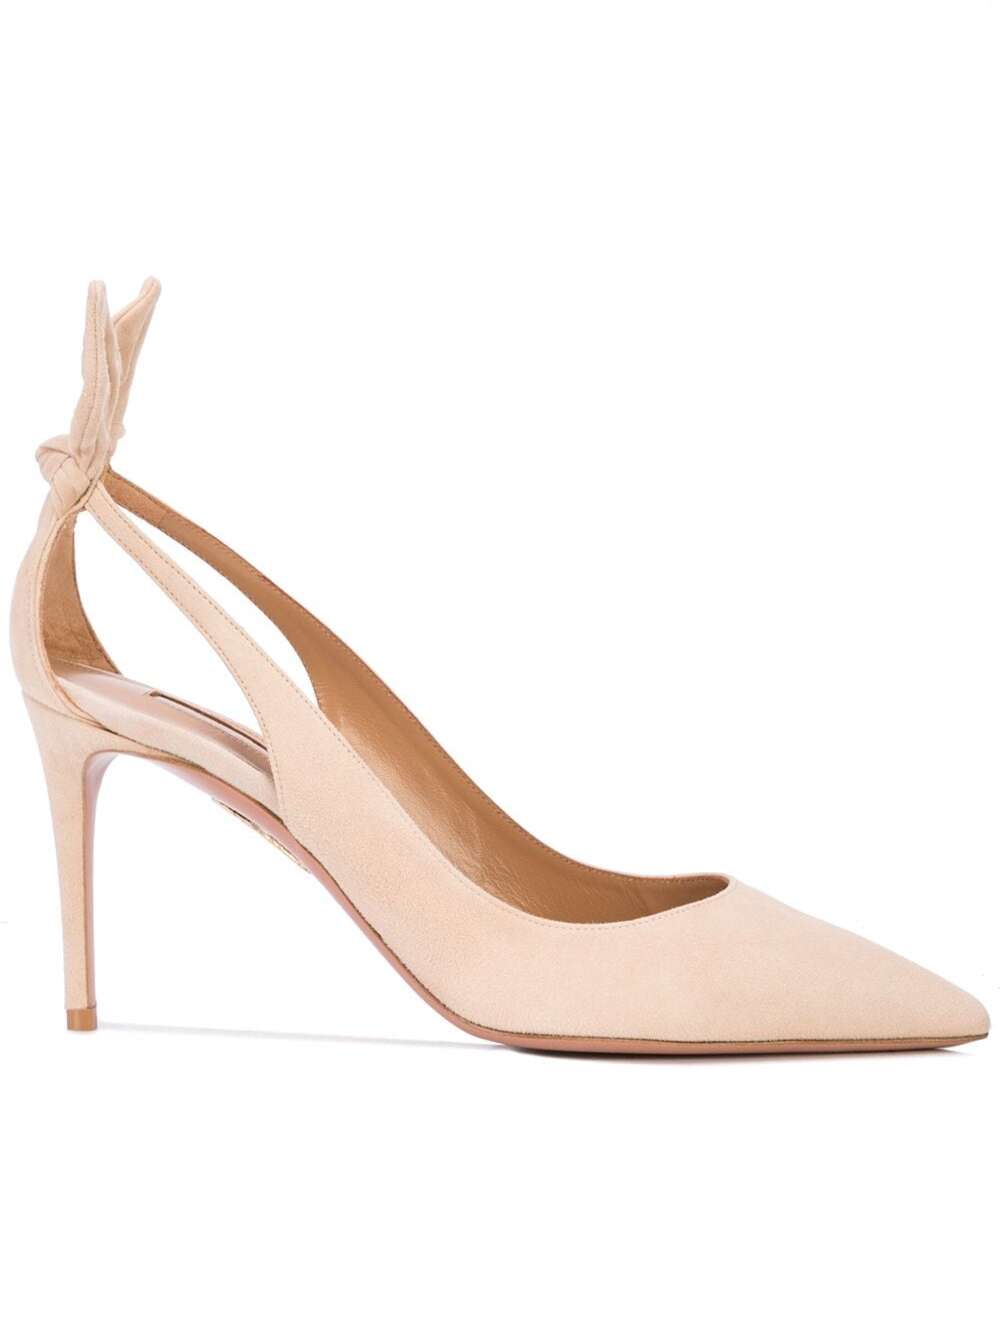 Aquazzura Pink Leather Pumps With Bow Detail